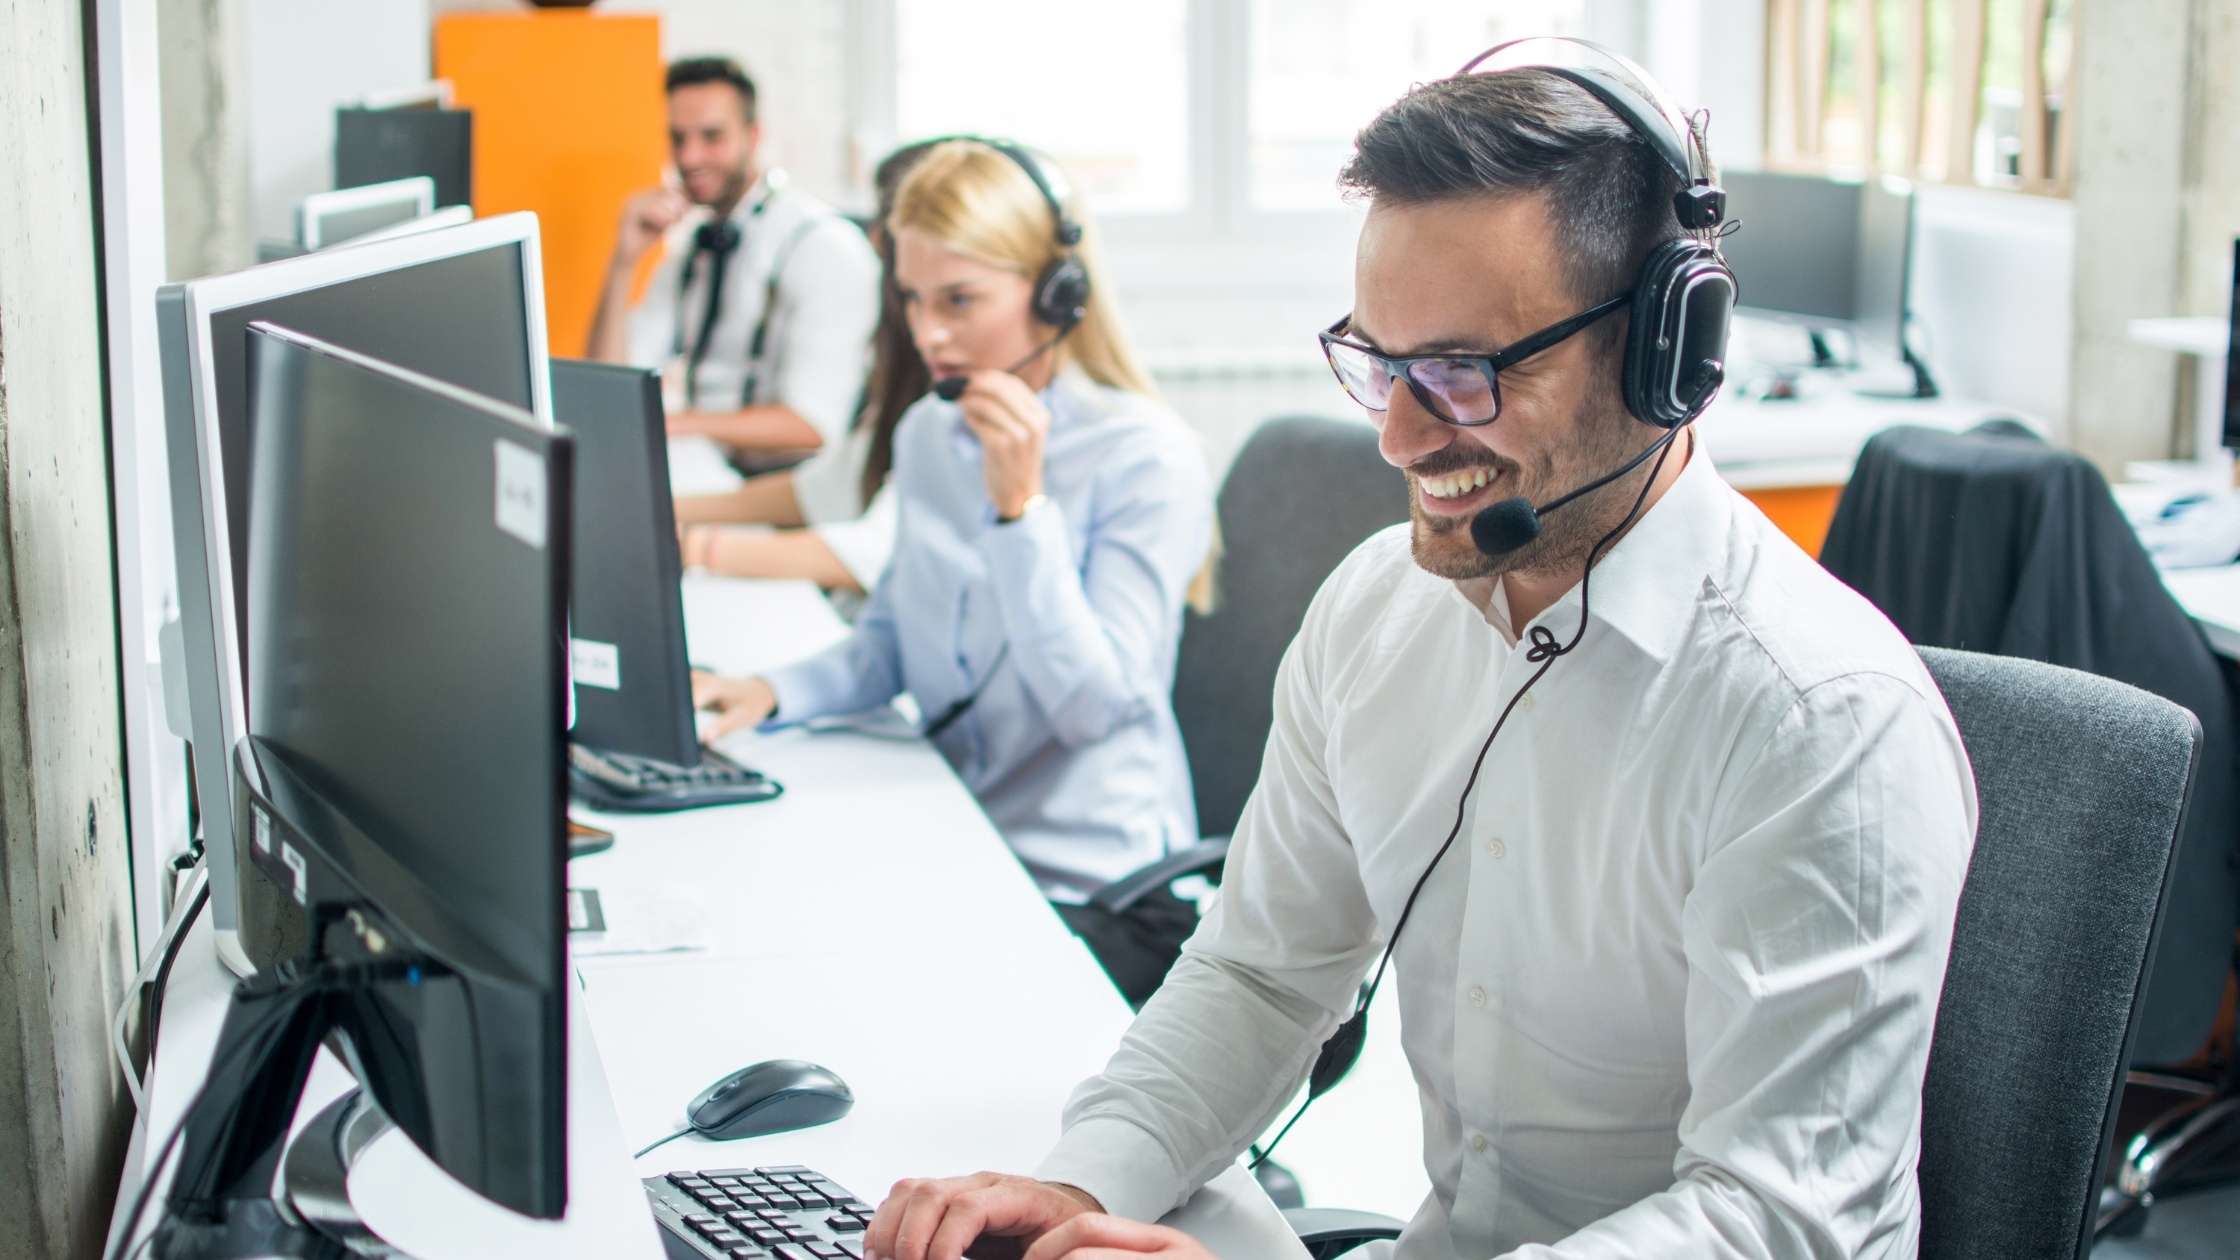 What Is the Purpose of Business Call Centers?